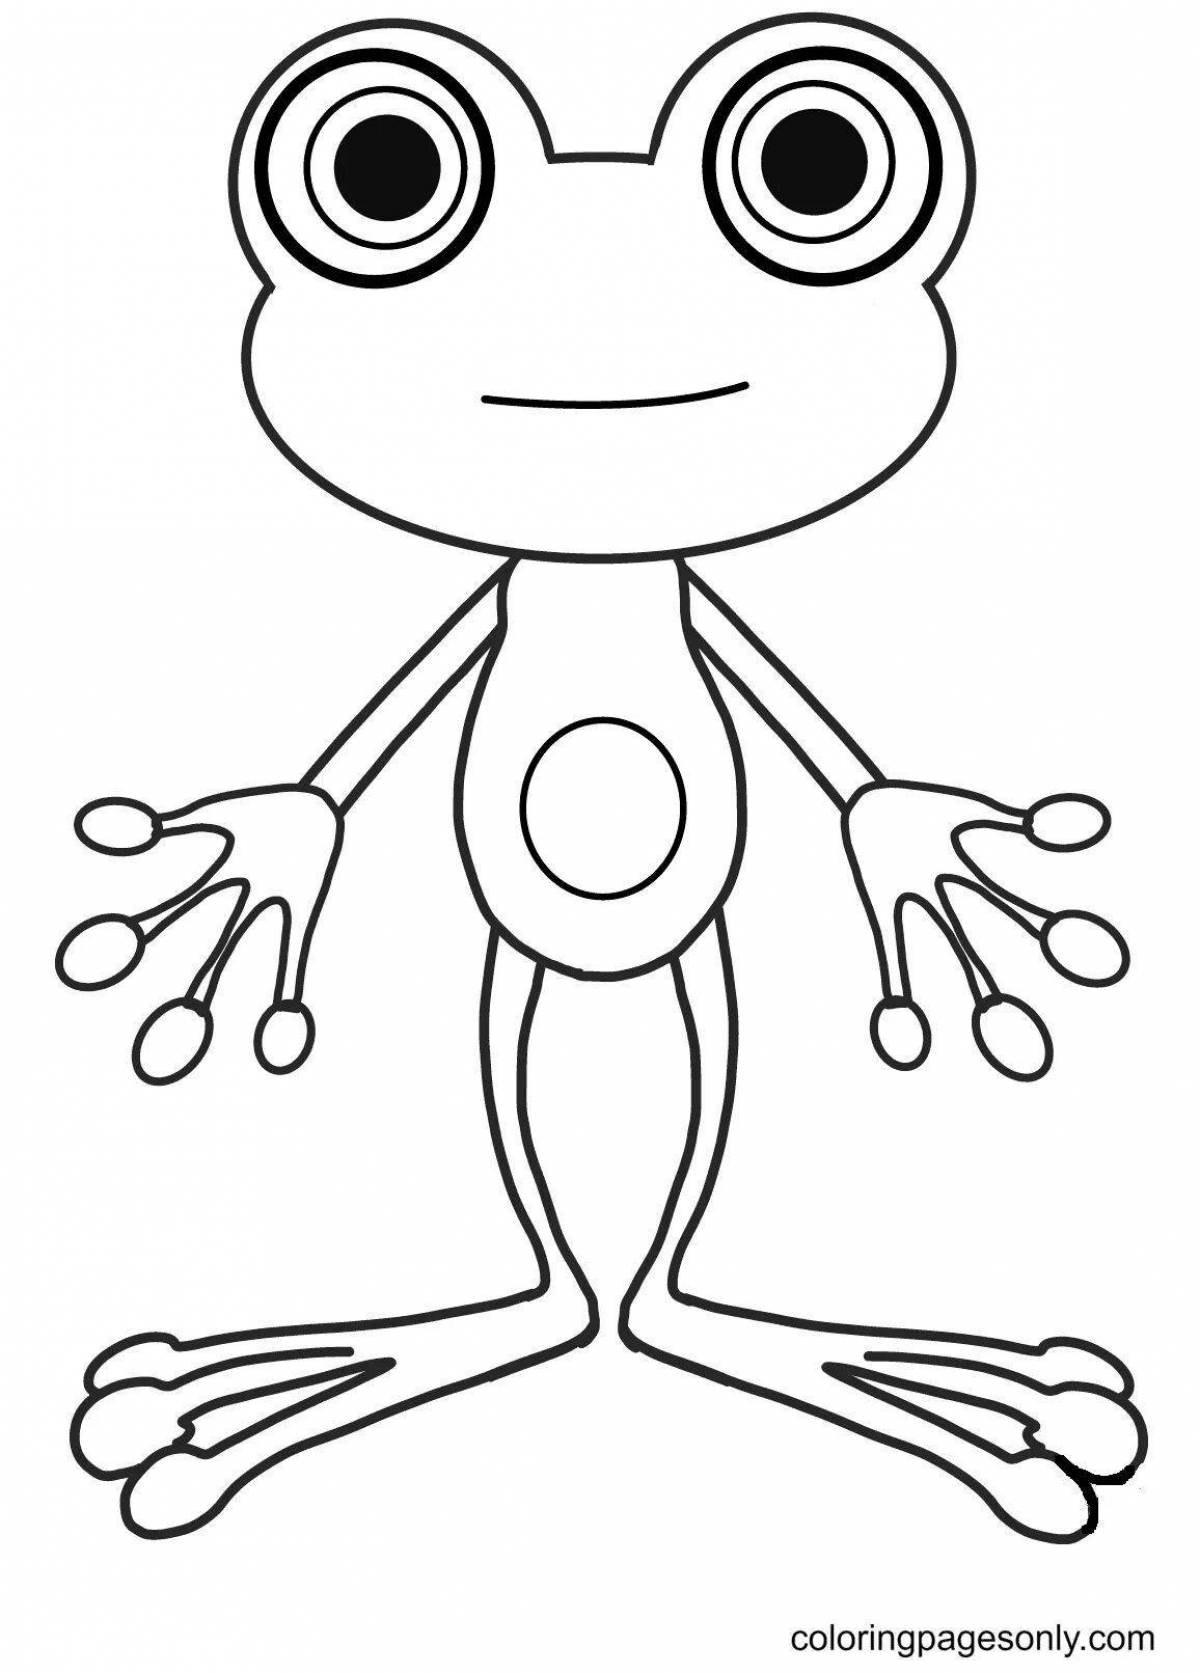 Amazing frog coloring page for kids